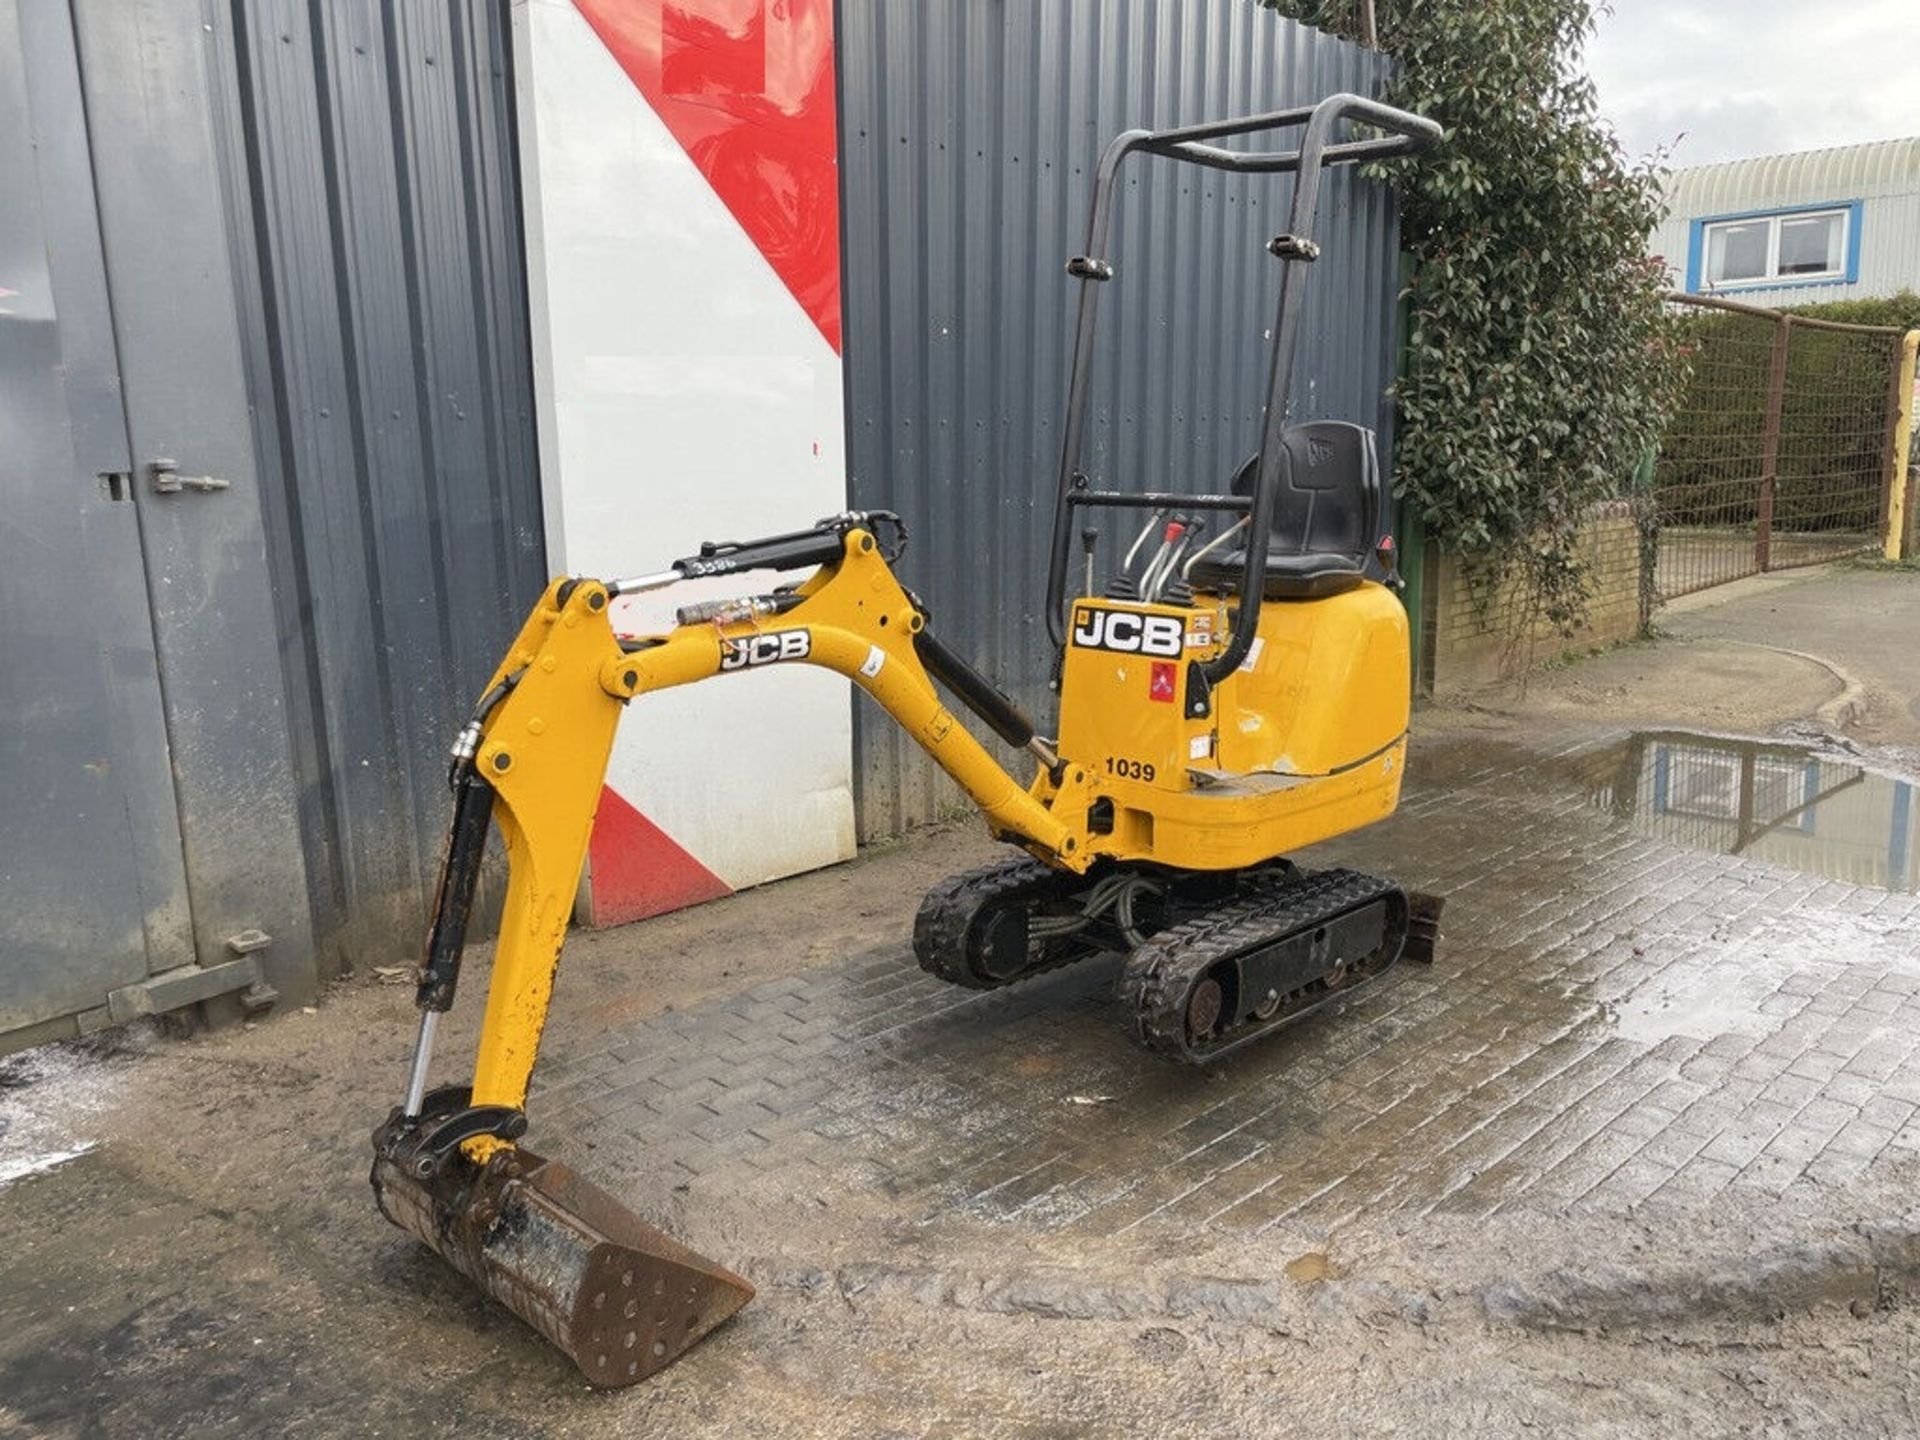 2020 JCB 8008 CTS: AGILE MICRO EXCAVATOR WITH 736 HOURS, PERKINS DIESEL ENGINE - Image 11 of 11